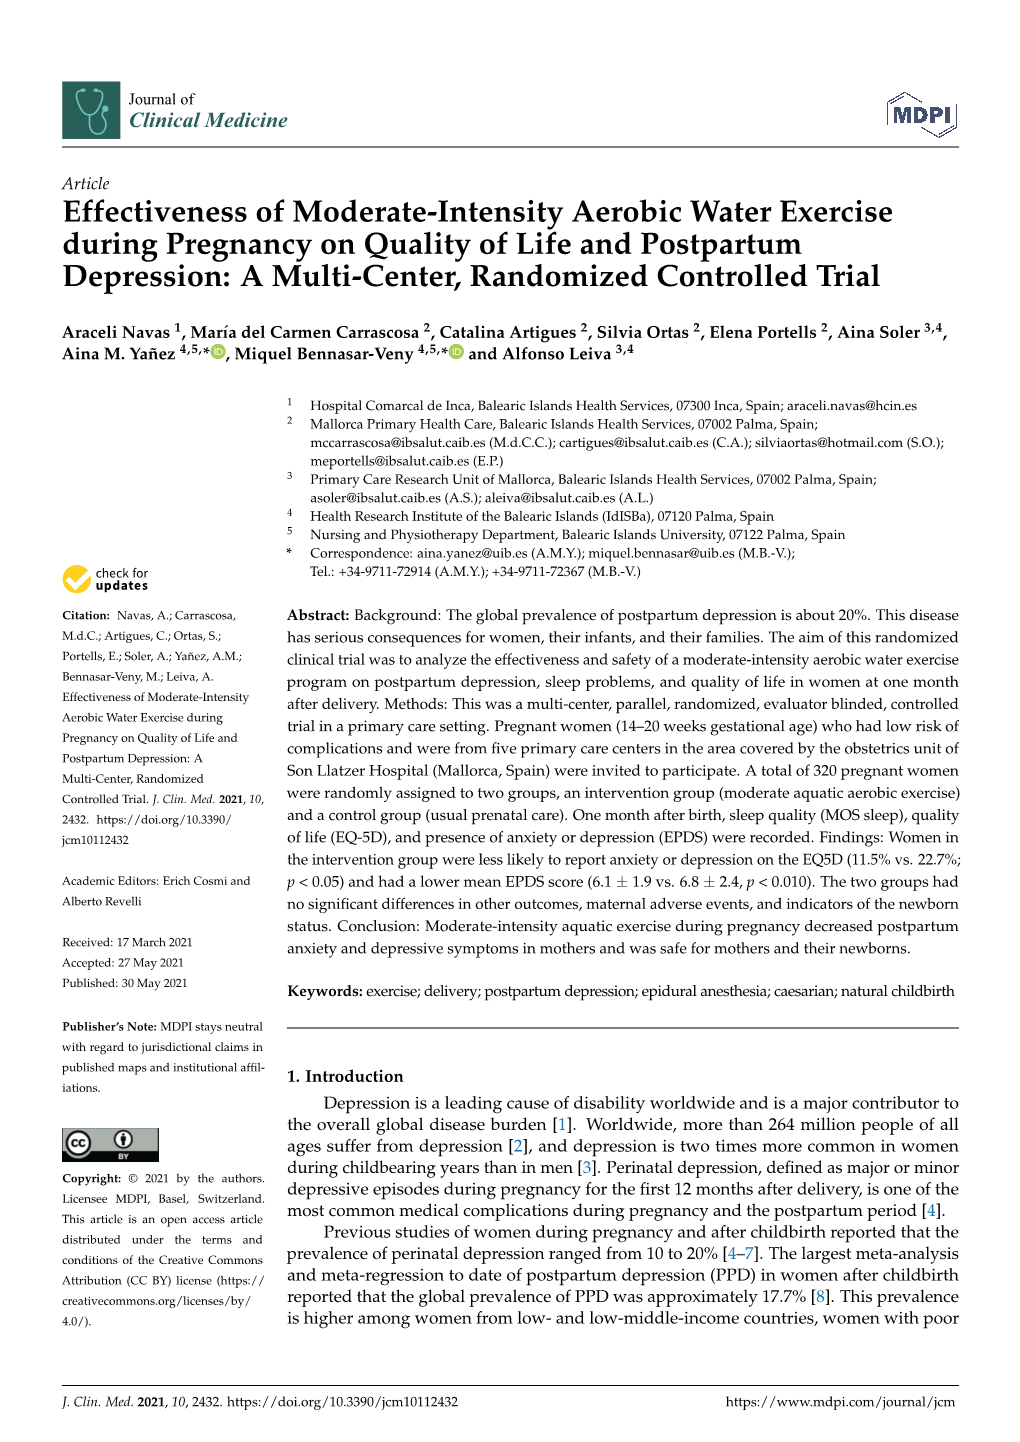 Effectiveness of Moderate-Intensity Aerobic Water Exercise During Pregnancy on Quality of Life and Postpartum Depression: a Multi-Center, Randomized Controlled Trial